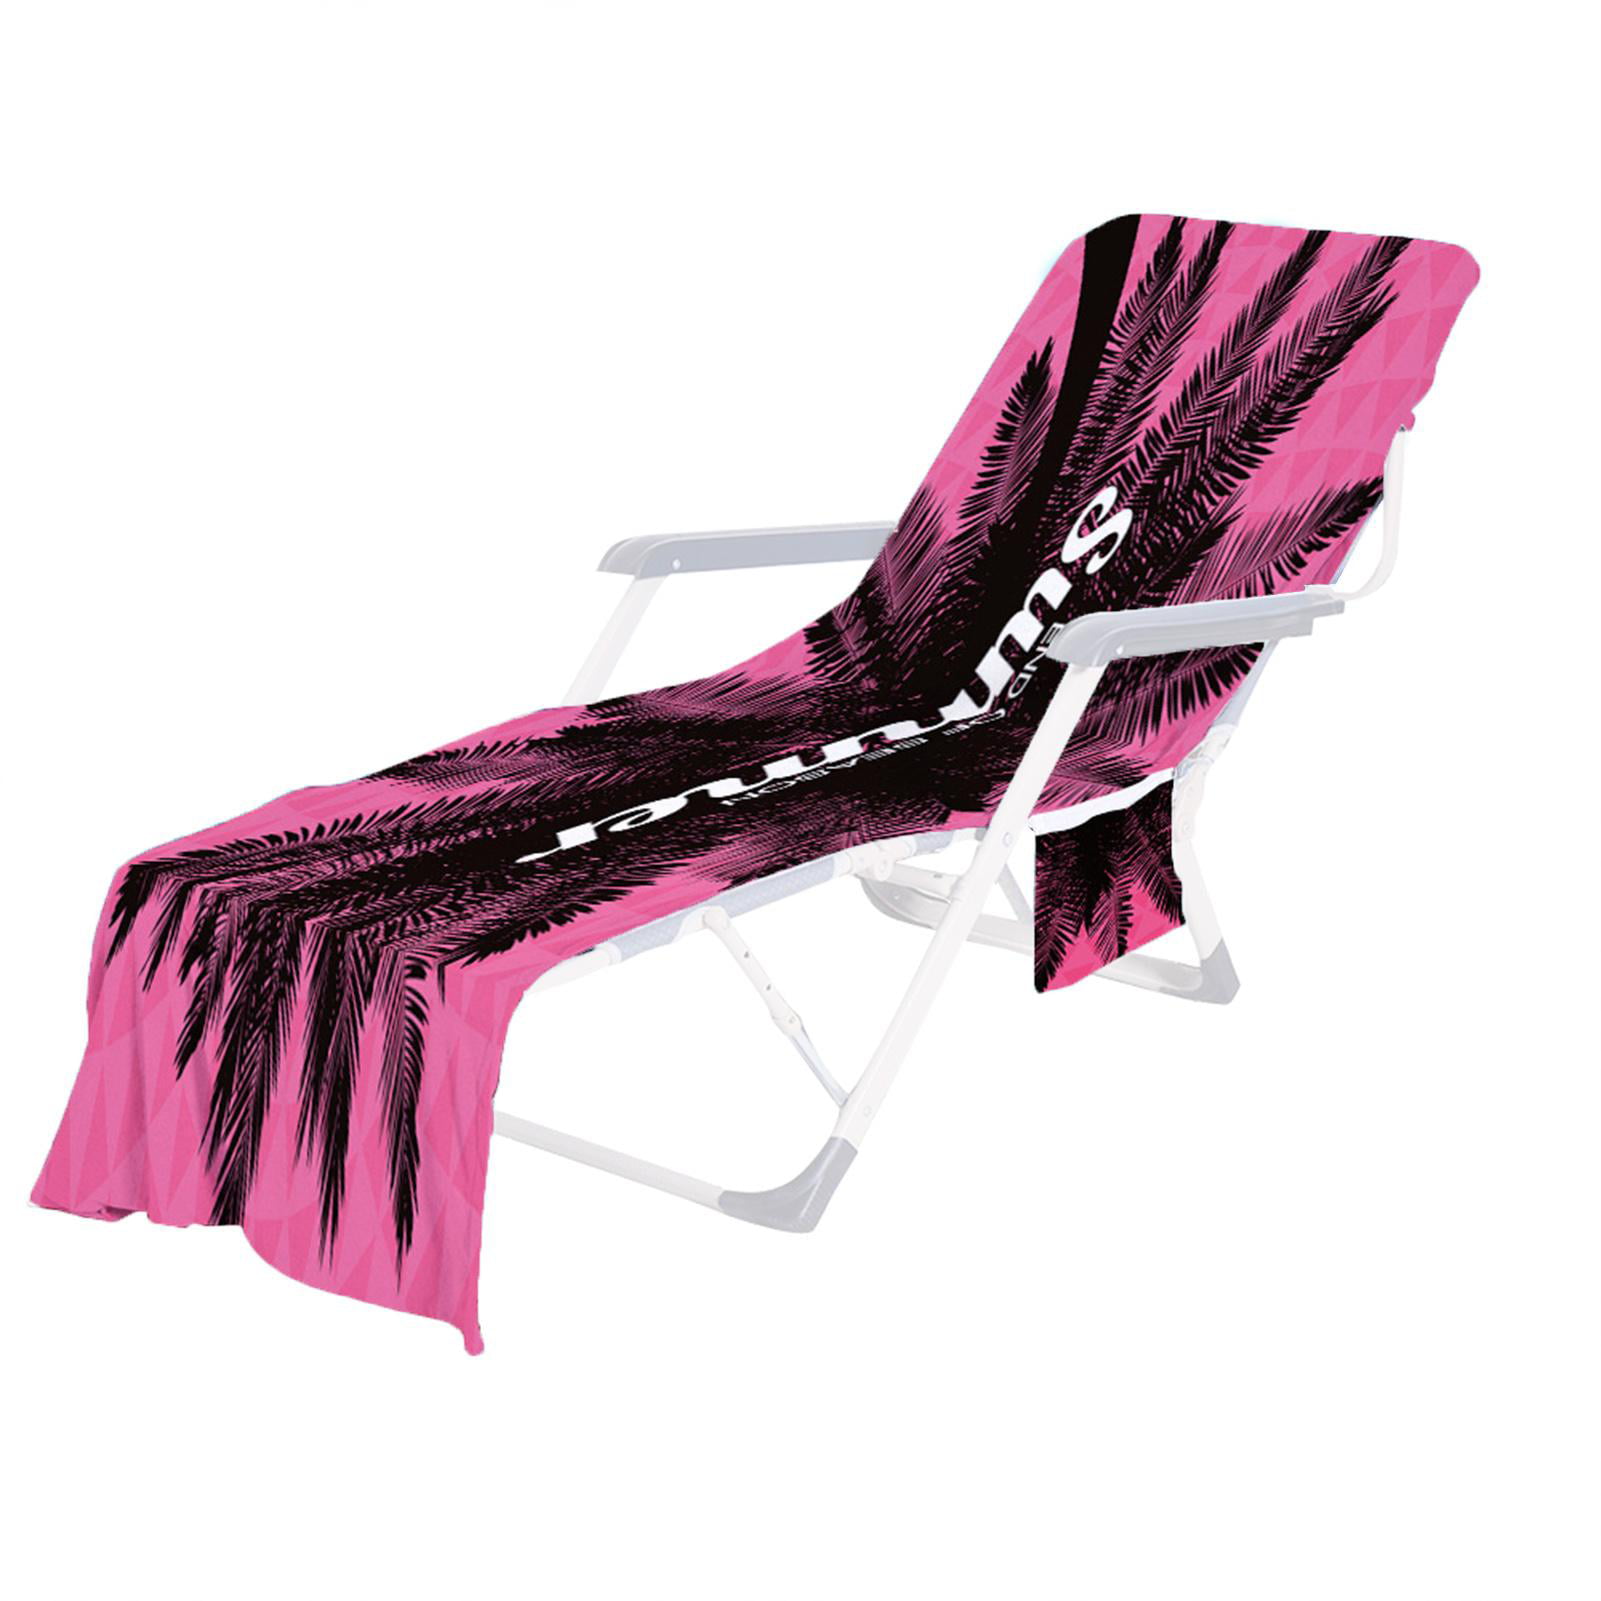 Lounge Chair Beach Towel Cover Microfiber Pool Sunbath Lounge Chair Cover,Outdoor Patio Chairs and Recliners Cover,Chaise Lounge Chair Cover with Side Pockets,Sunbathing Fast Drying Terry Towels